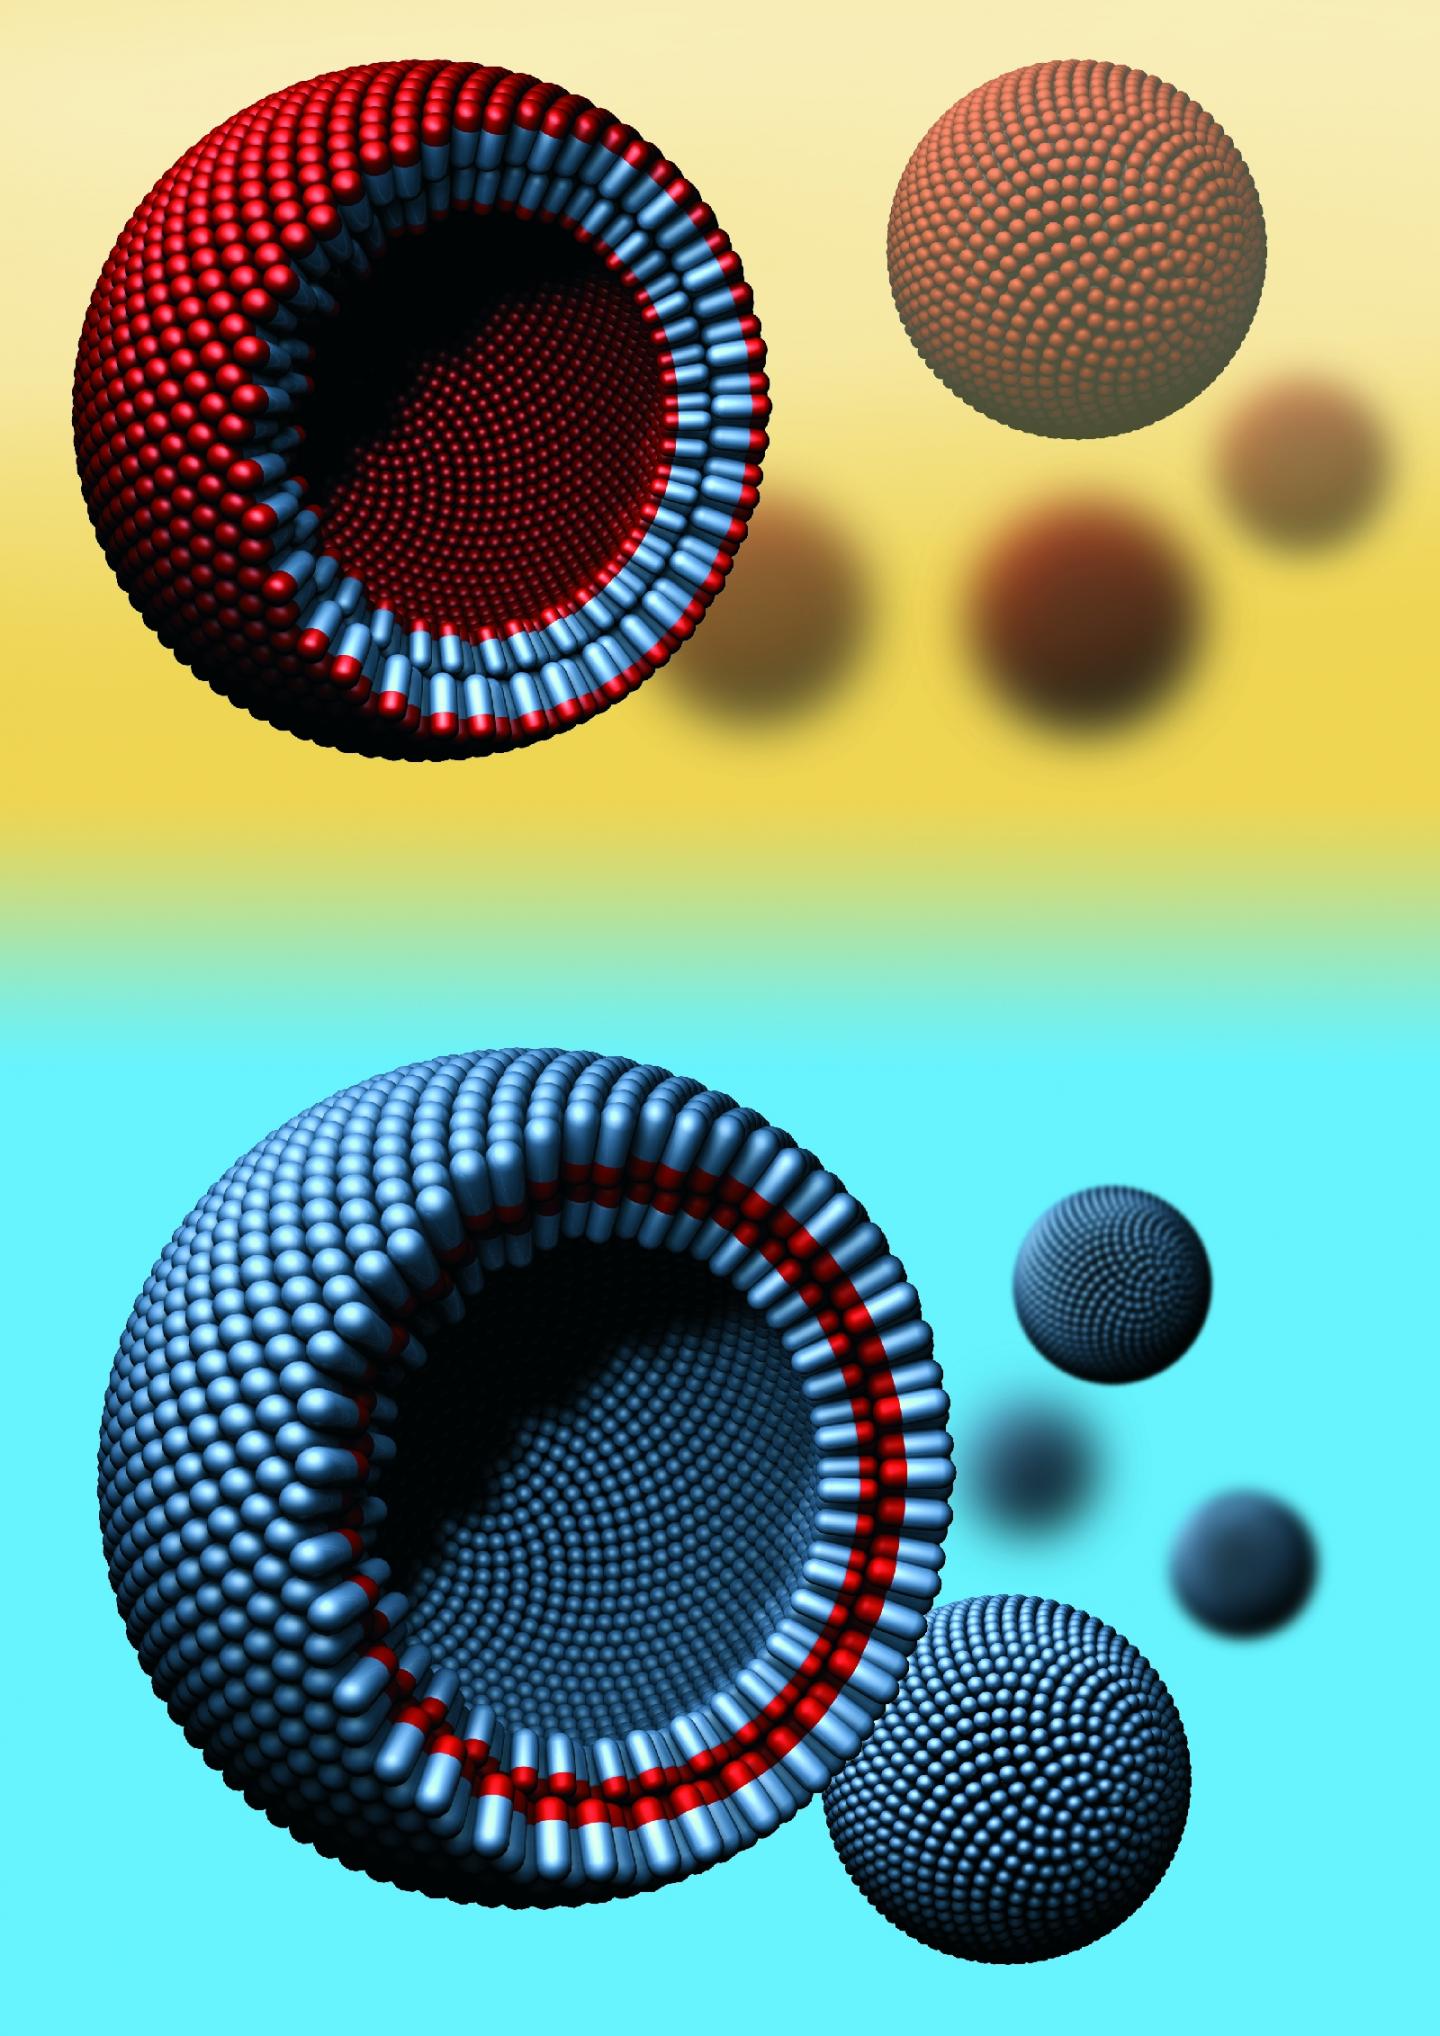 Physicists Develop World'S First Artificial Cell-Like Spheres from Natural Proteins